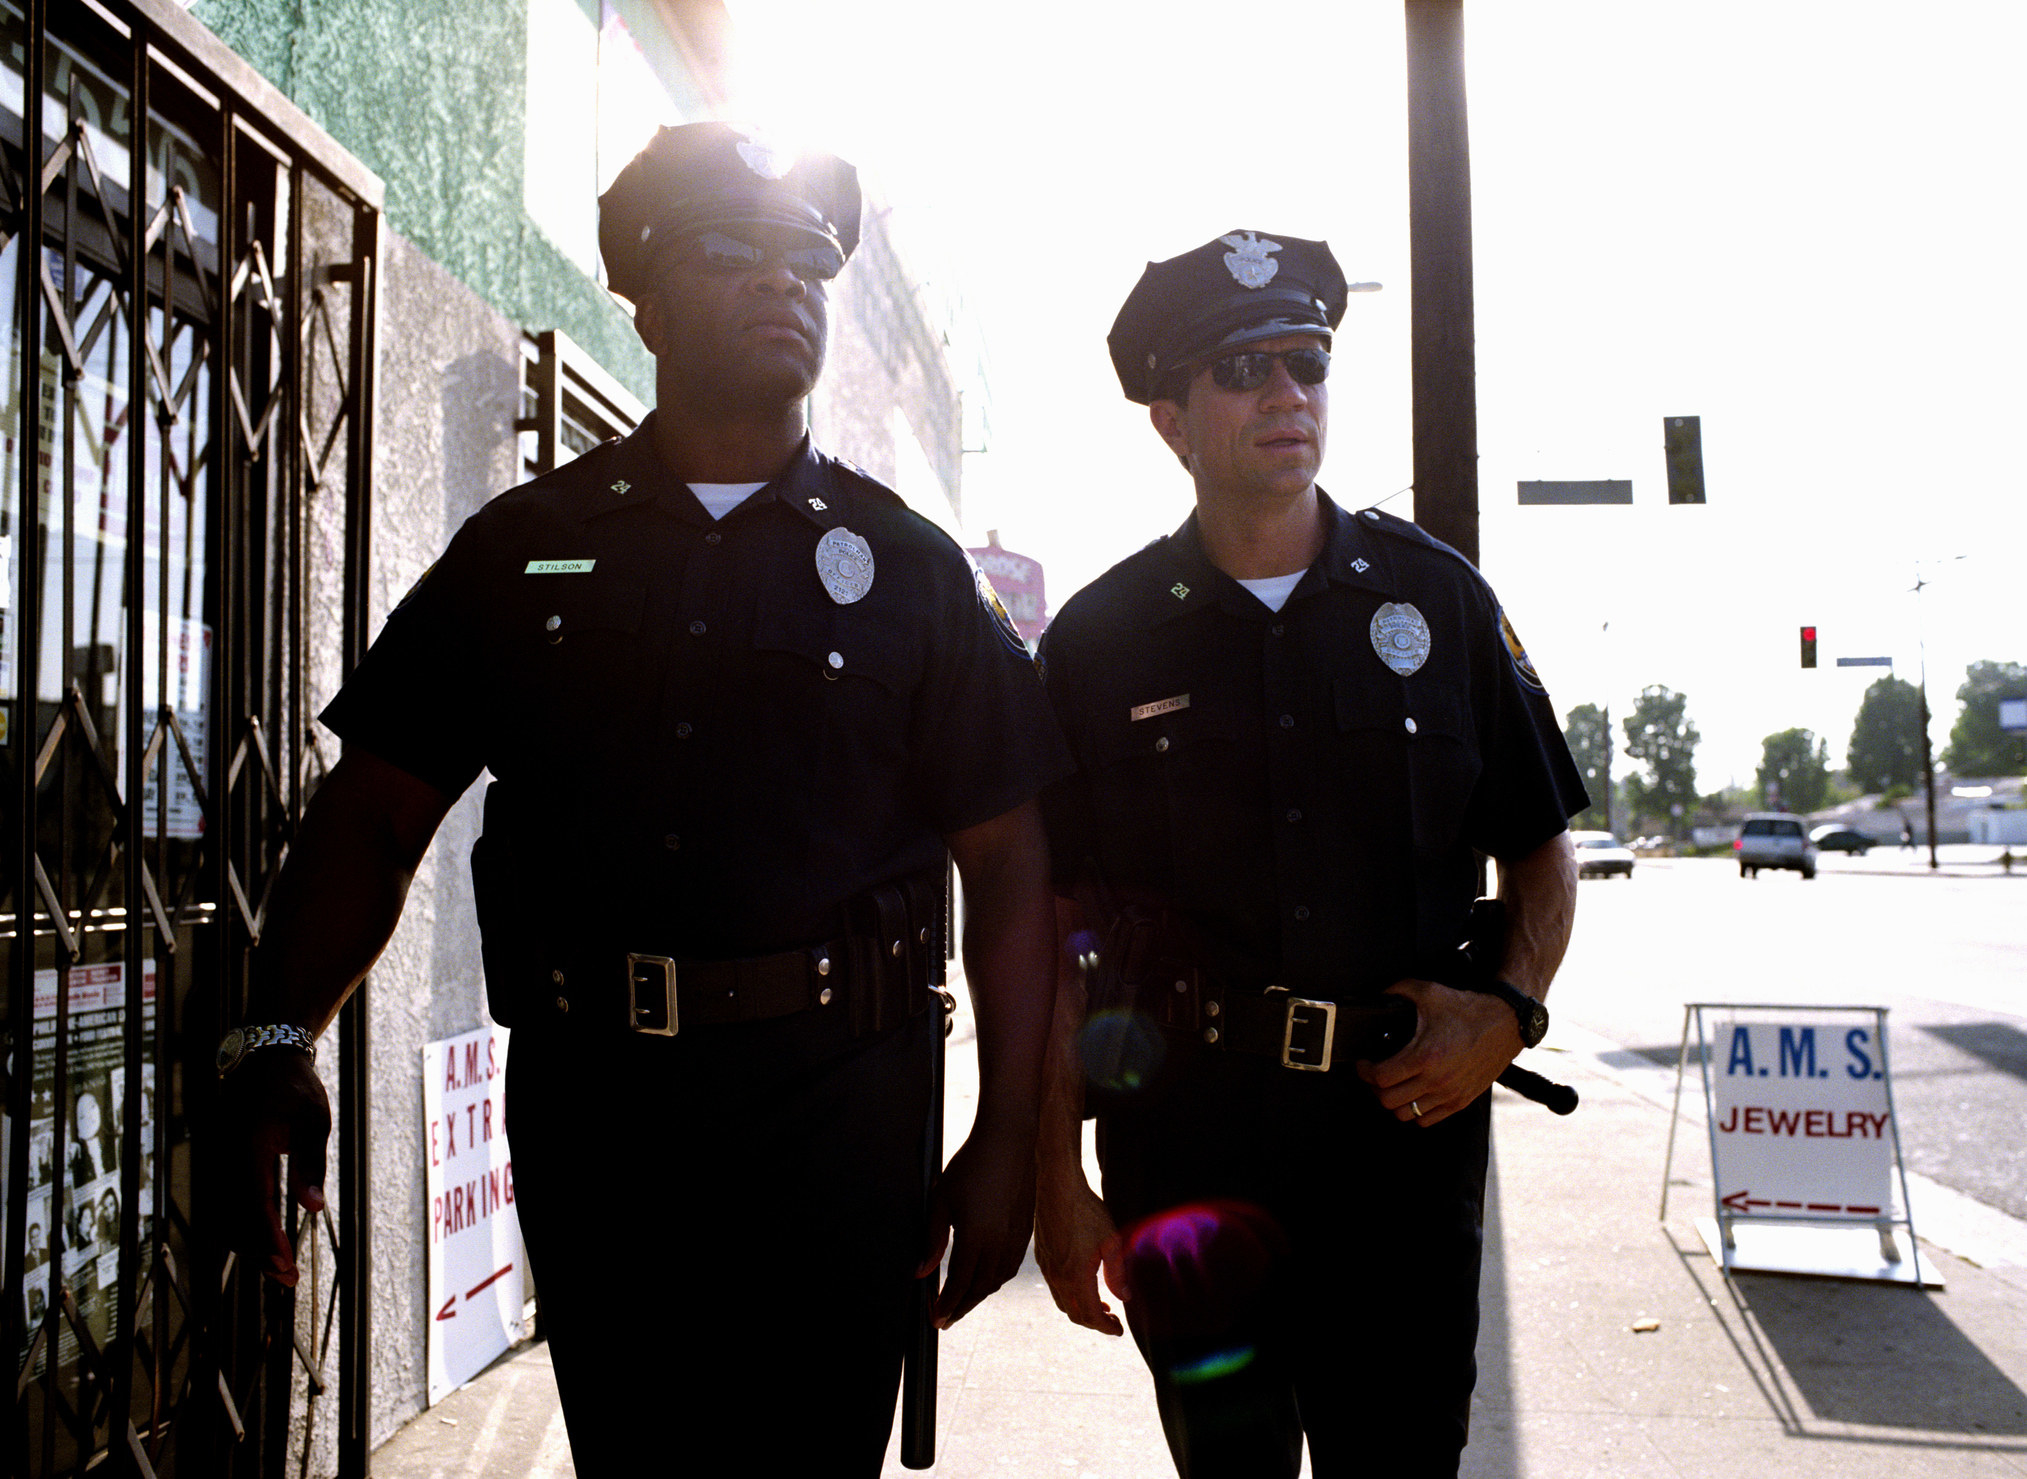 Two police officers